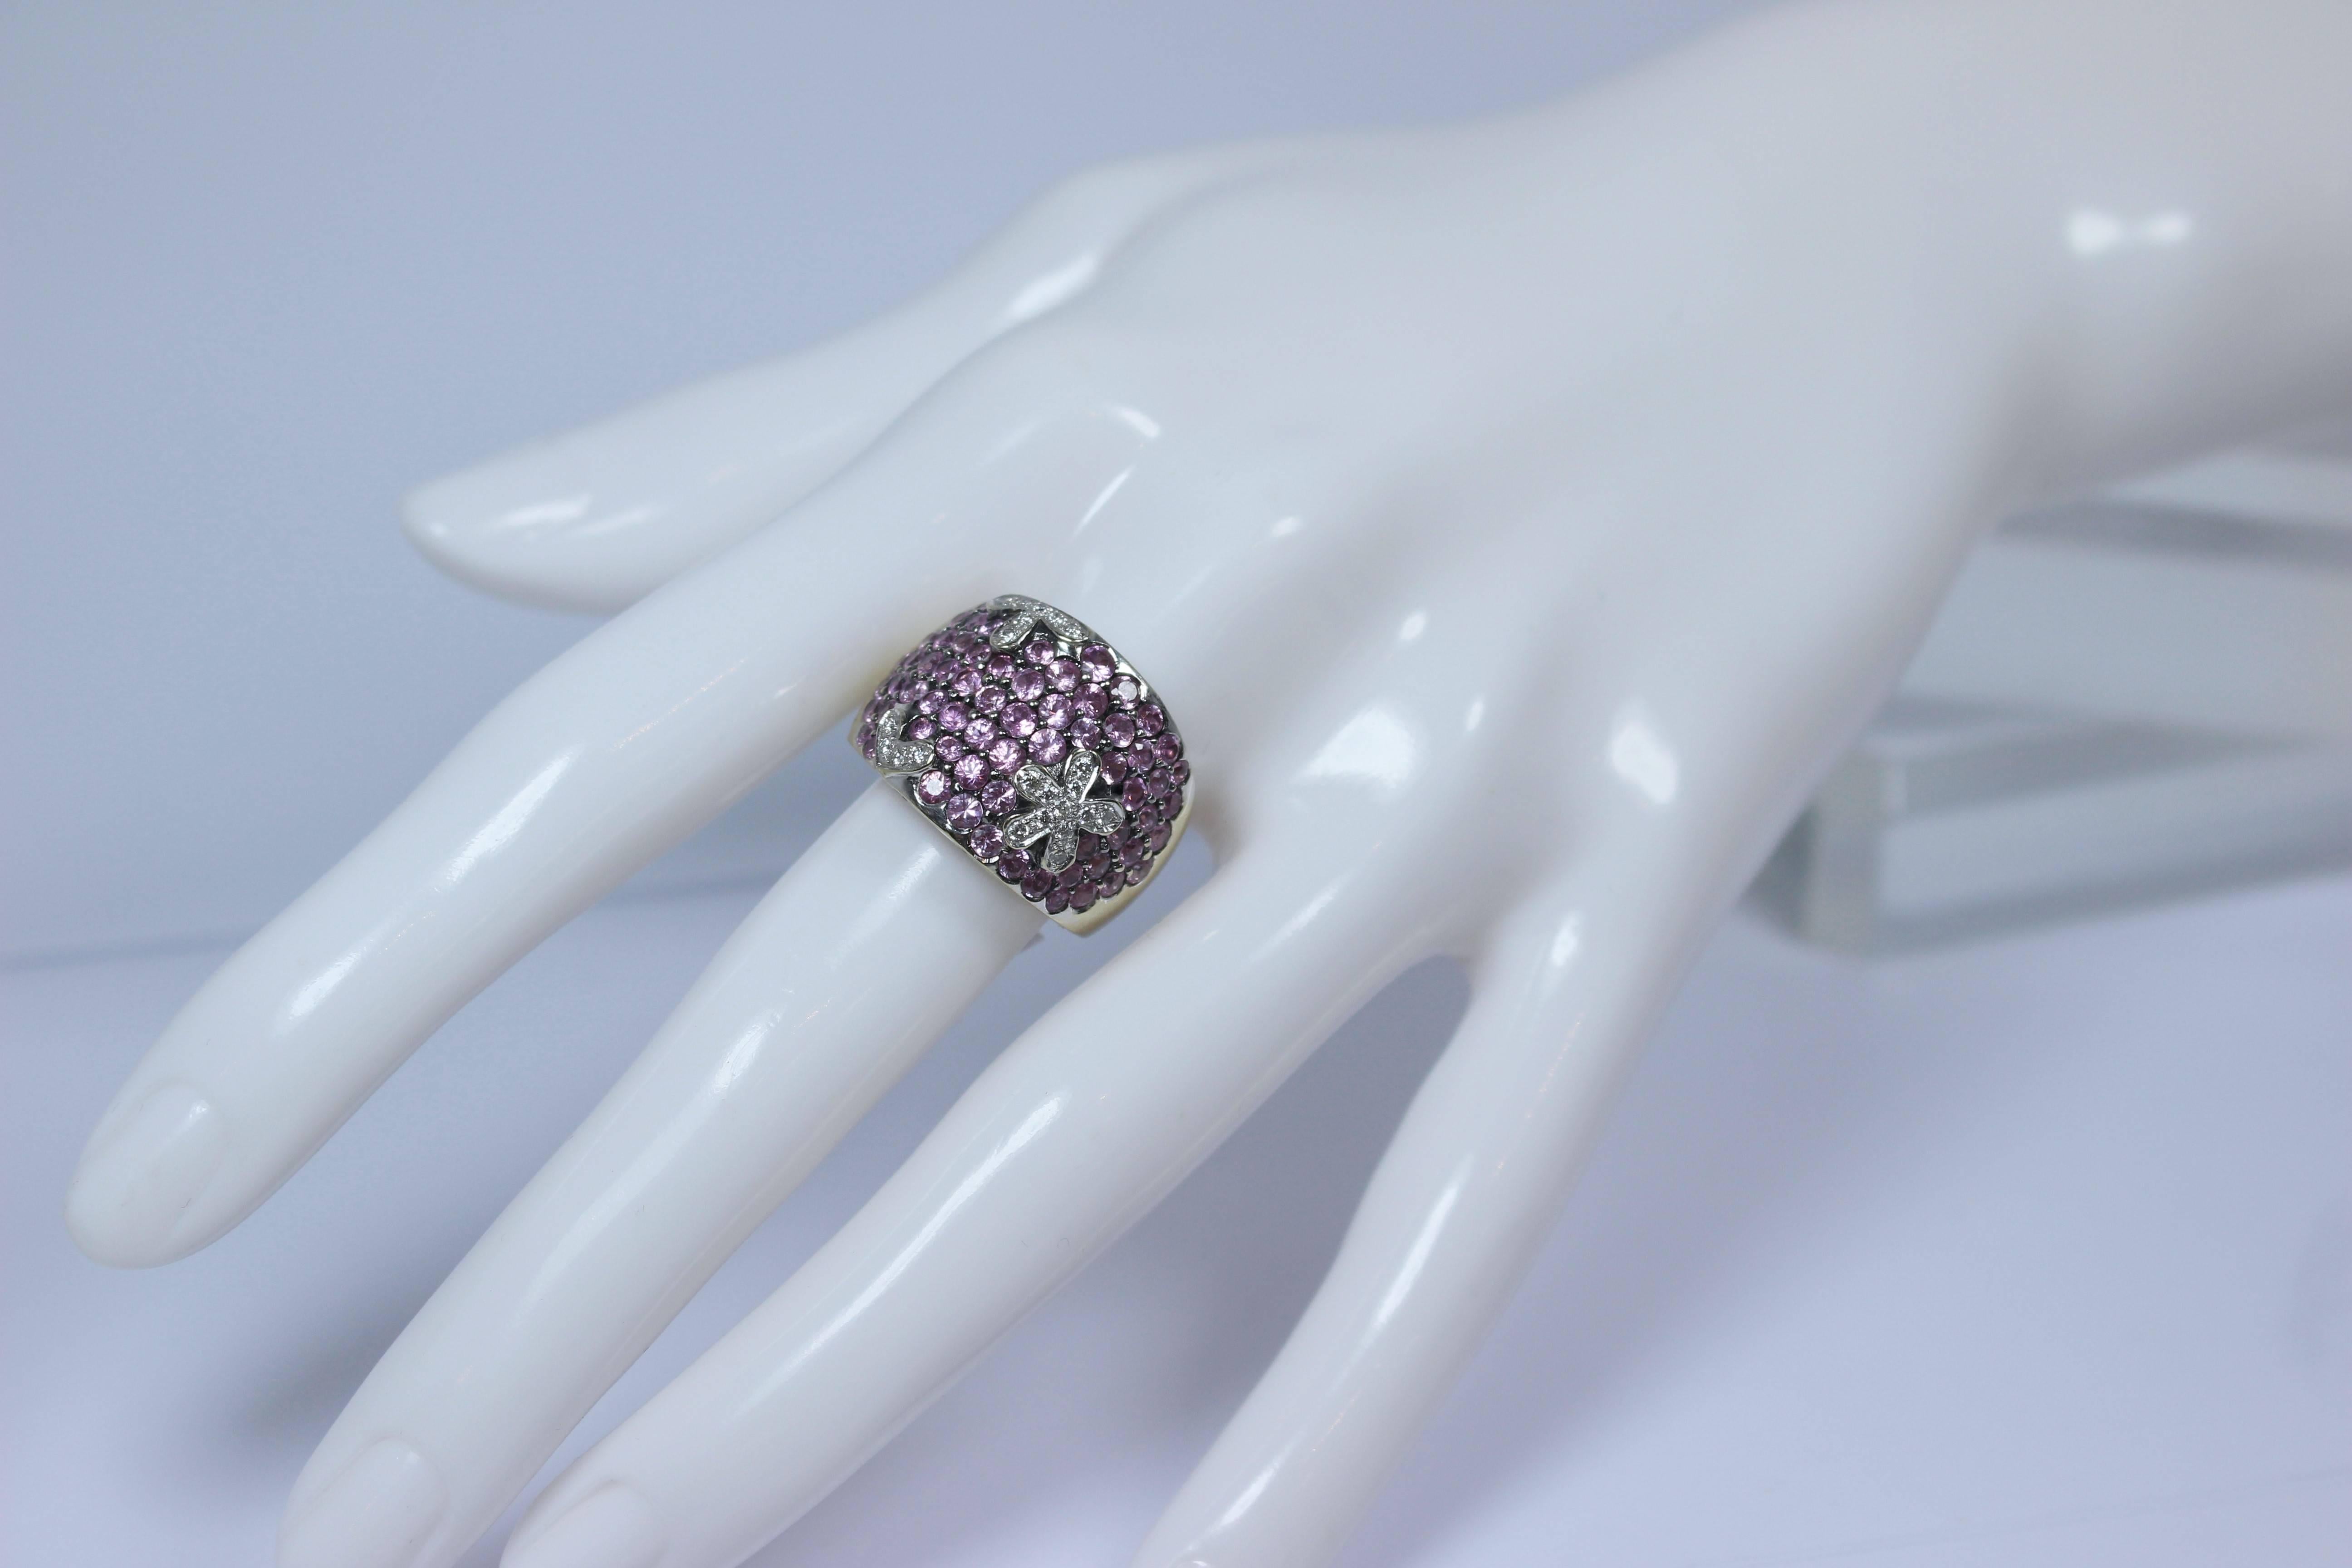 Brilliant Cut Cristina Ferrare Pave Pink Tourmaline and Diamond Gold Ring and Earring Set